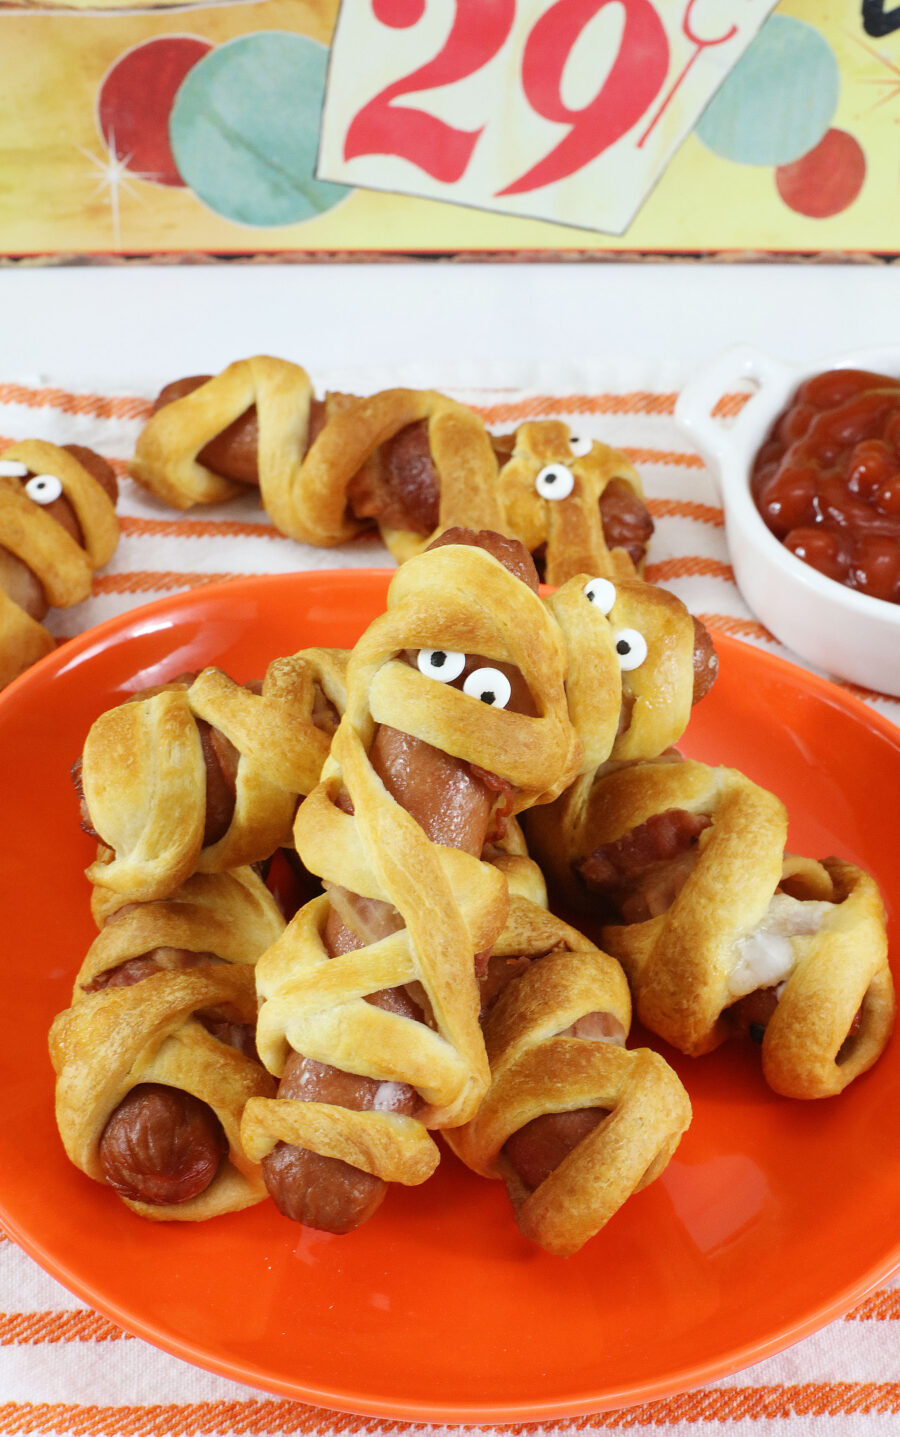 Mummy dogs on a plate